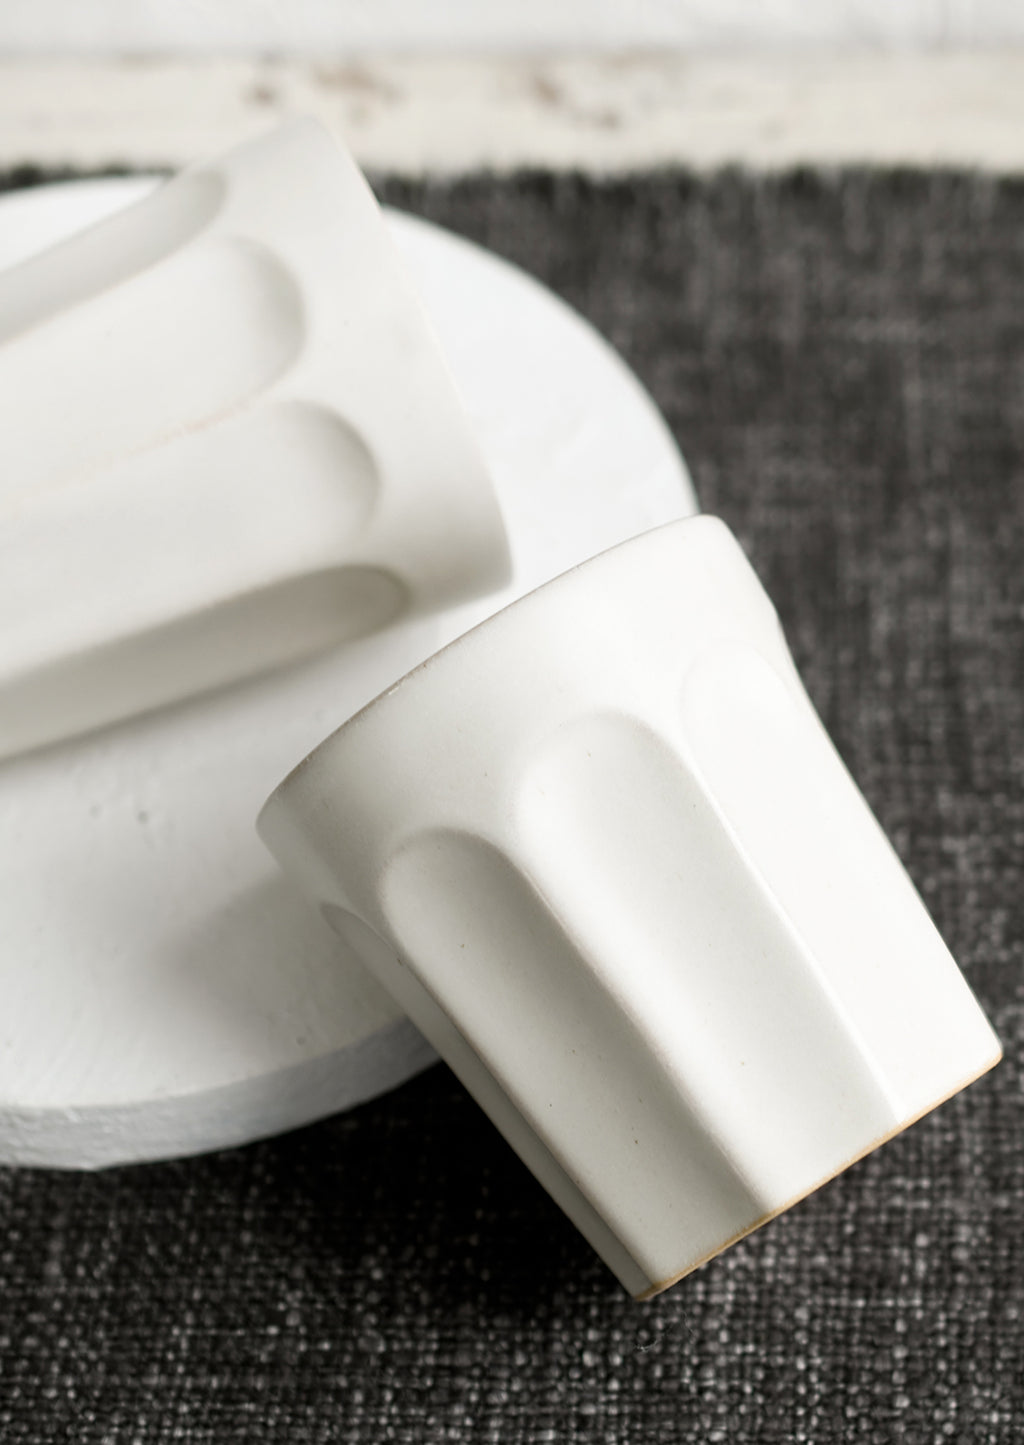 Satin White: A ceramic bistrot style cup in white.